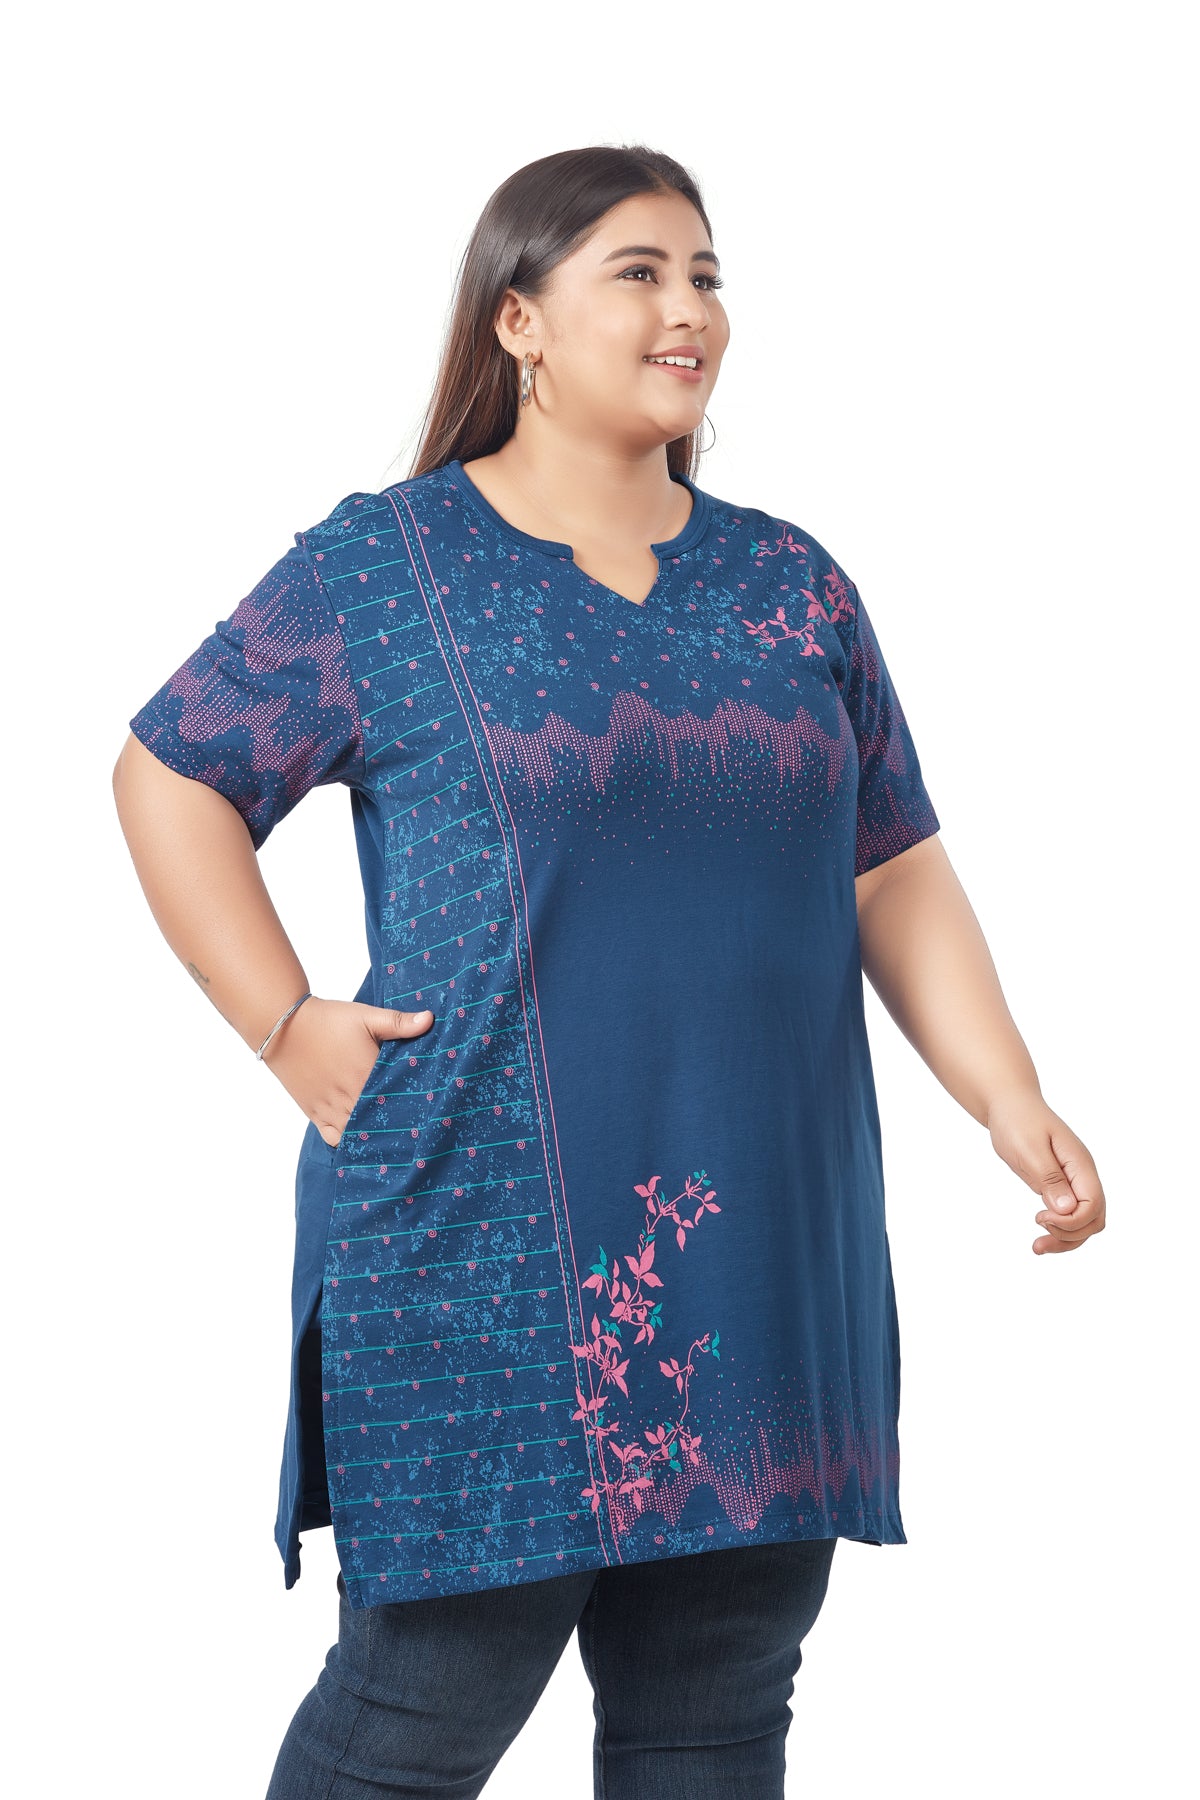 Plus Size Printed Long Tops For Women Half Sleeves - Pack of 2 (Pink & Blue)